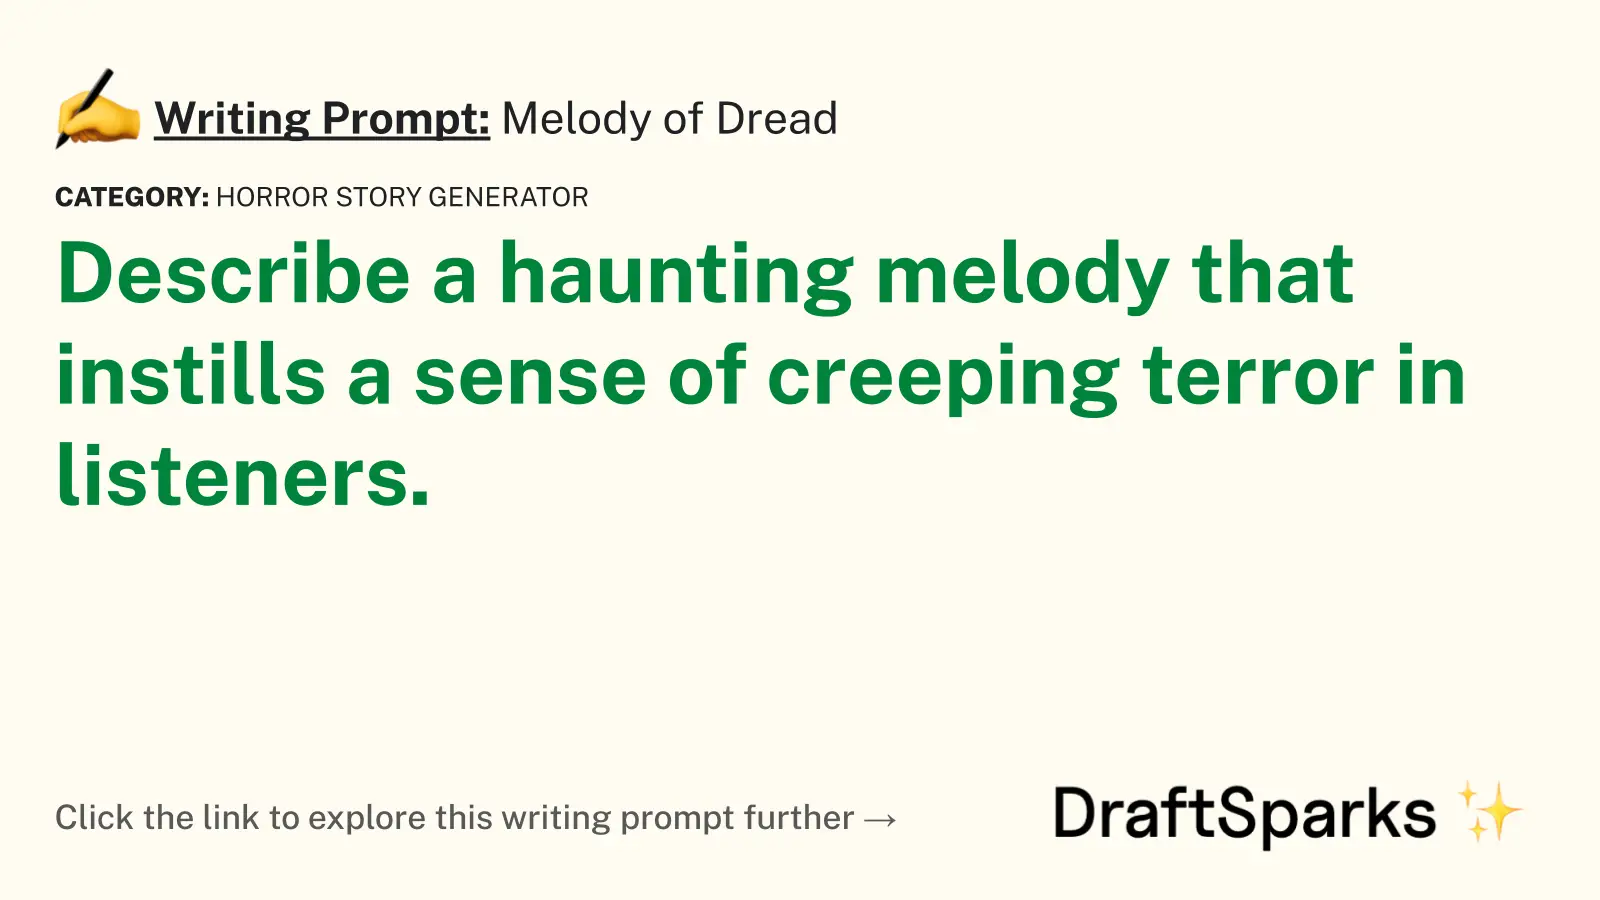 Melody of Dread